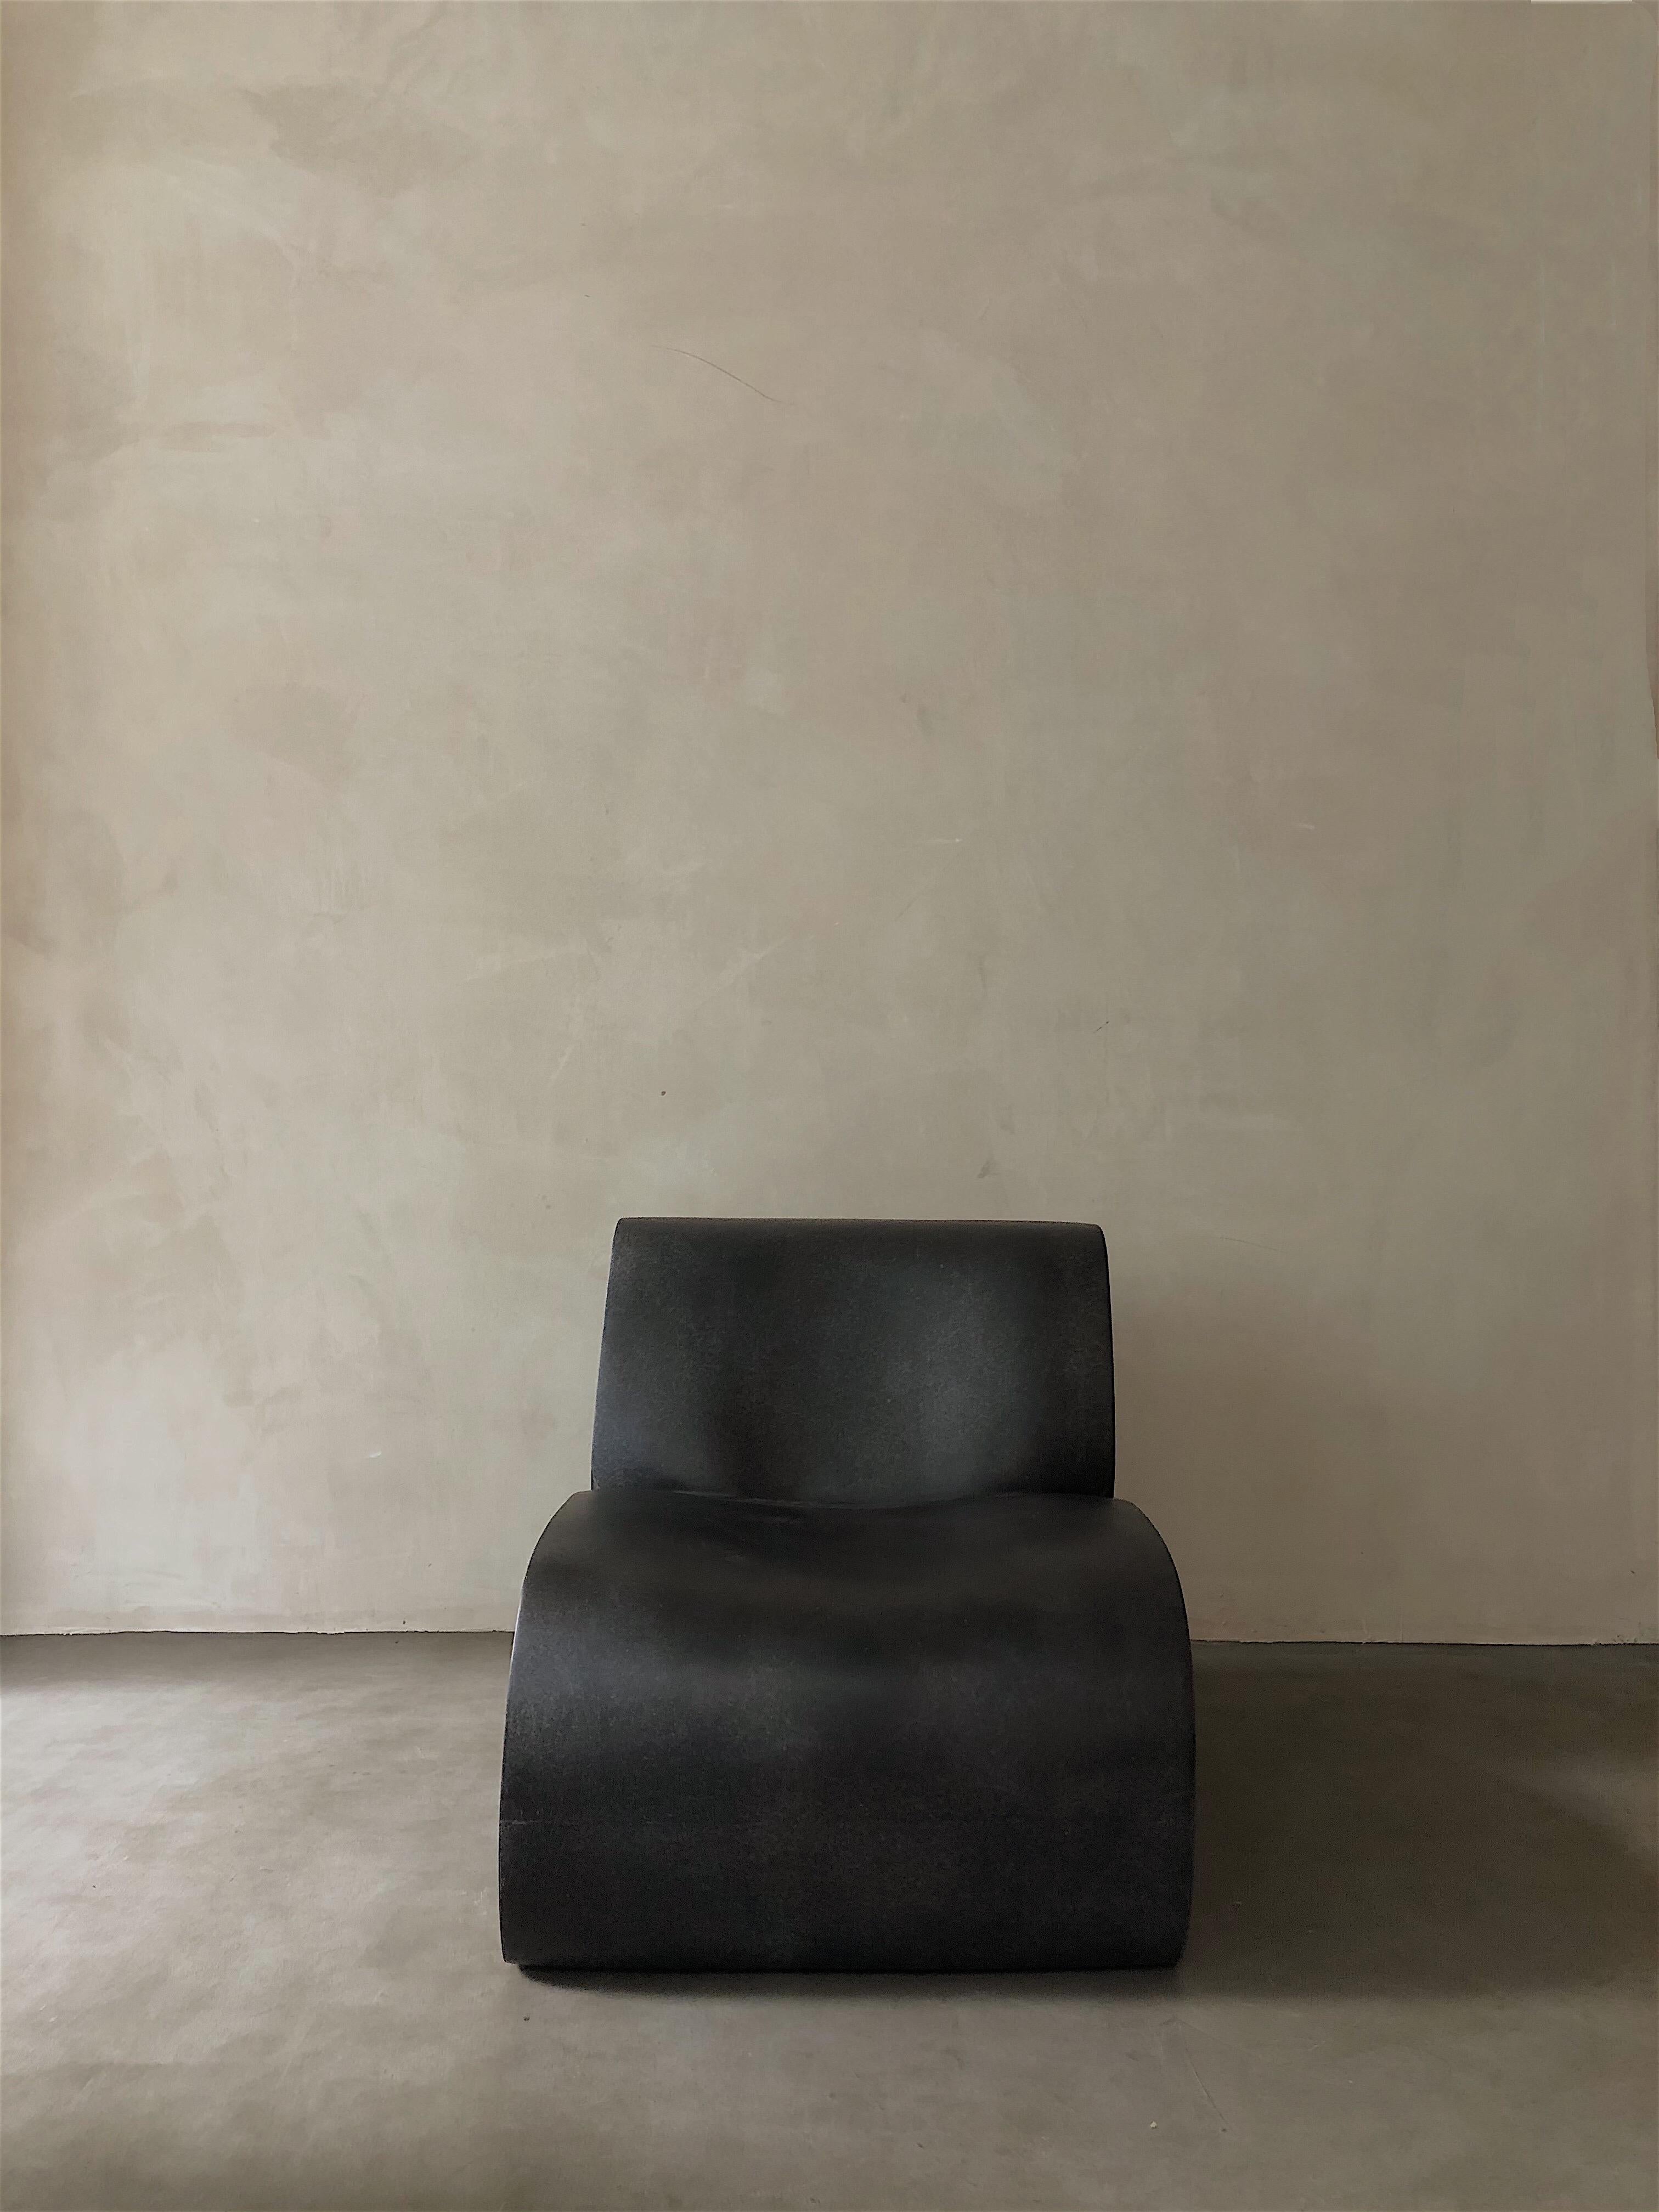 Coffee curl up lounge chair by kar
Materials: FRP.
Dimensions: 63 x 84 x 66 cm.

It shapes in a curl-up position, casual meanwhile restrained. The side designed as a cross section of the furniture to present the curve and texture.

Kar- is the root